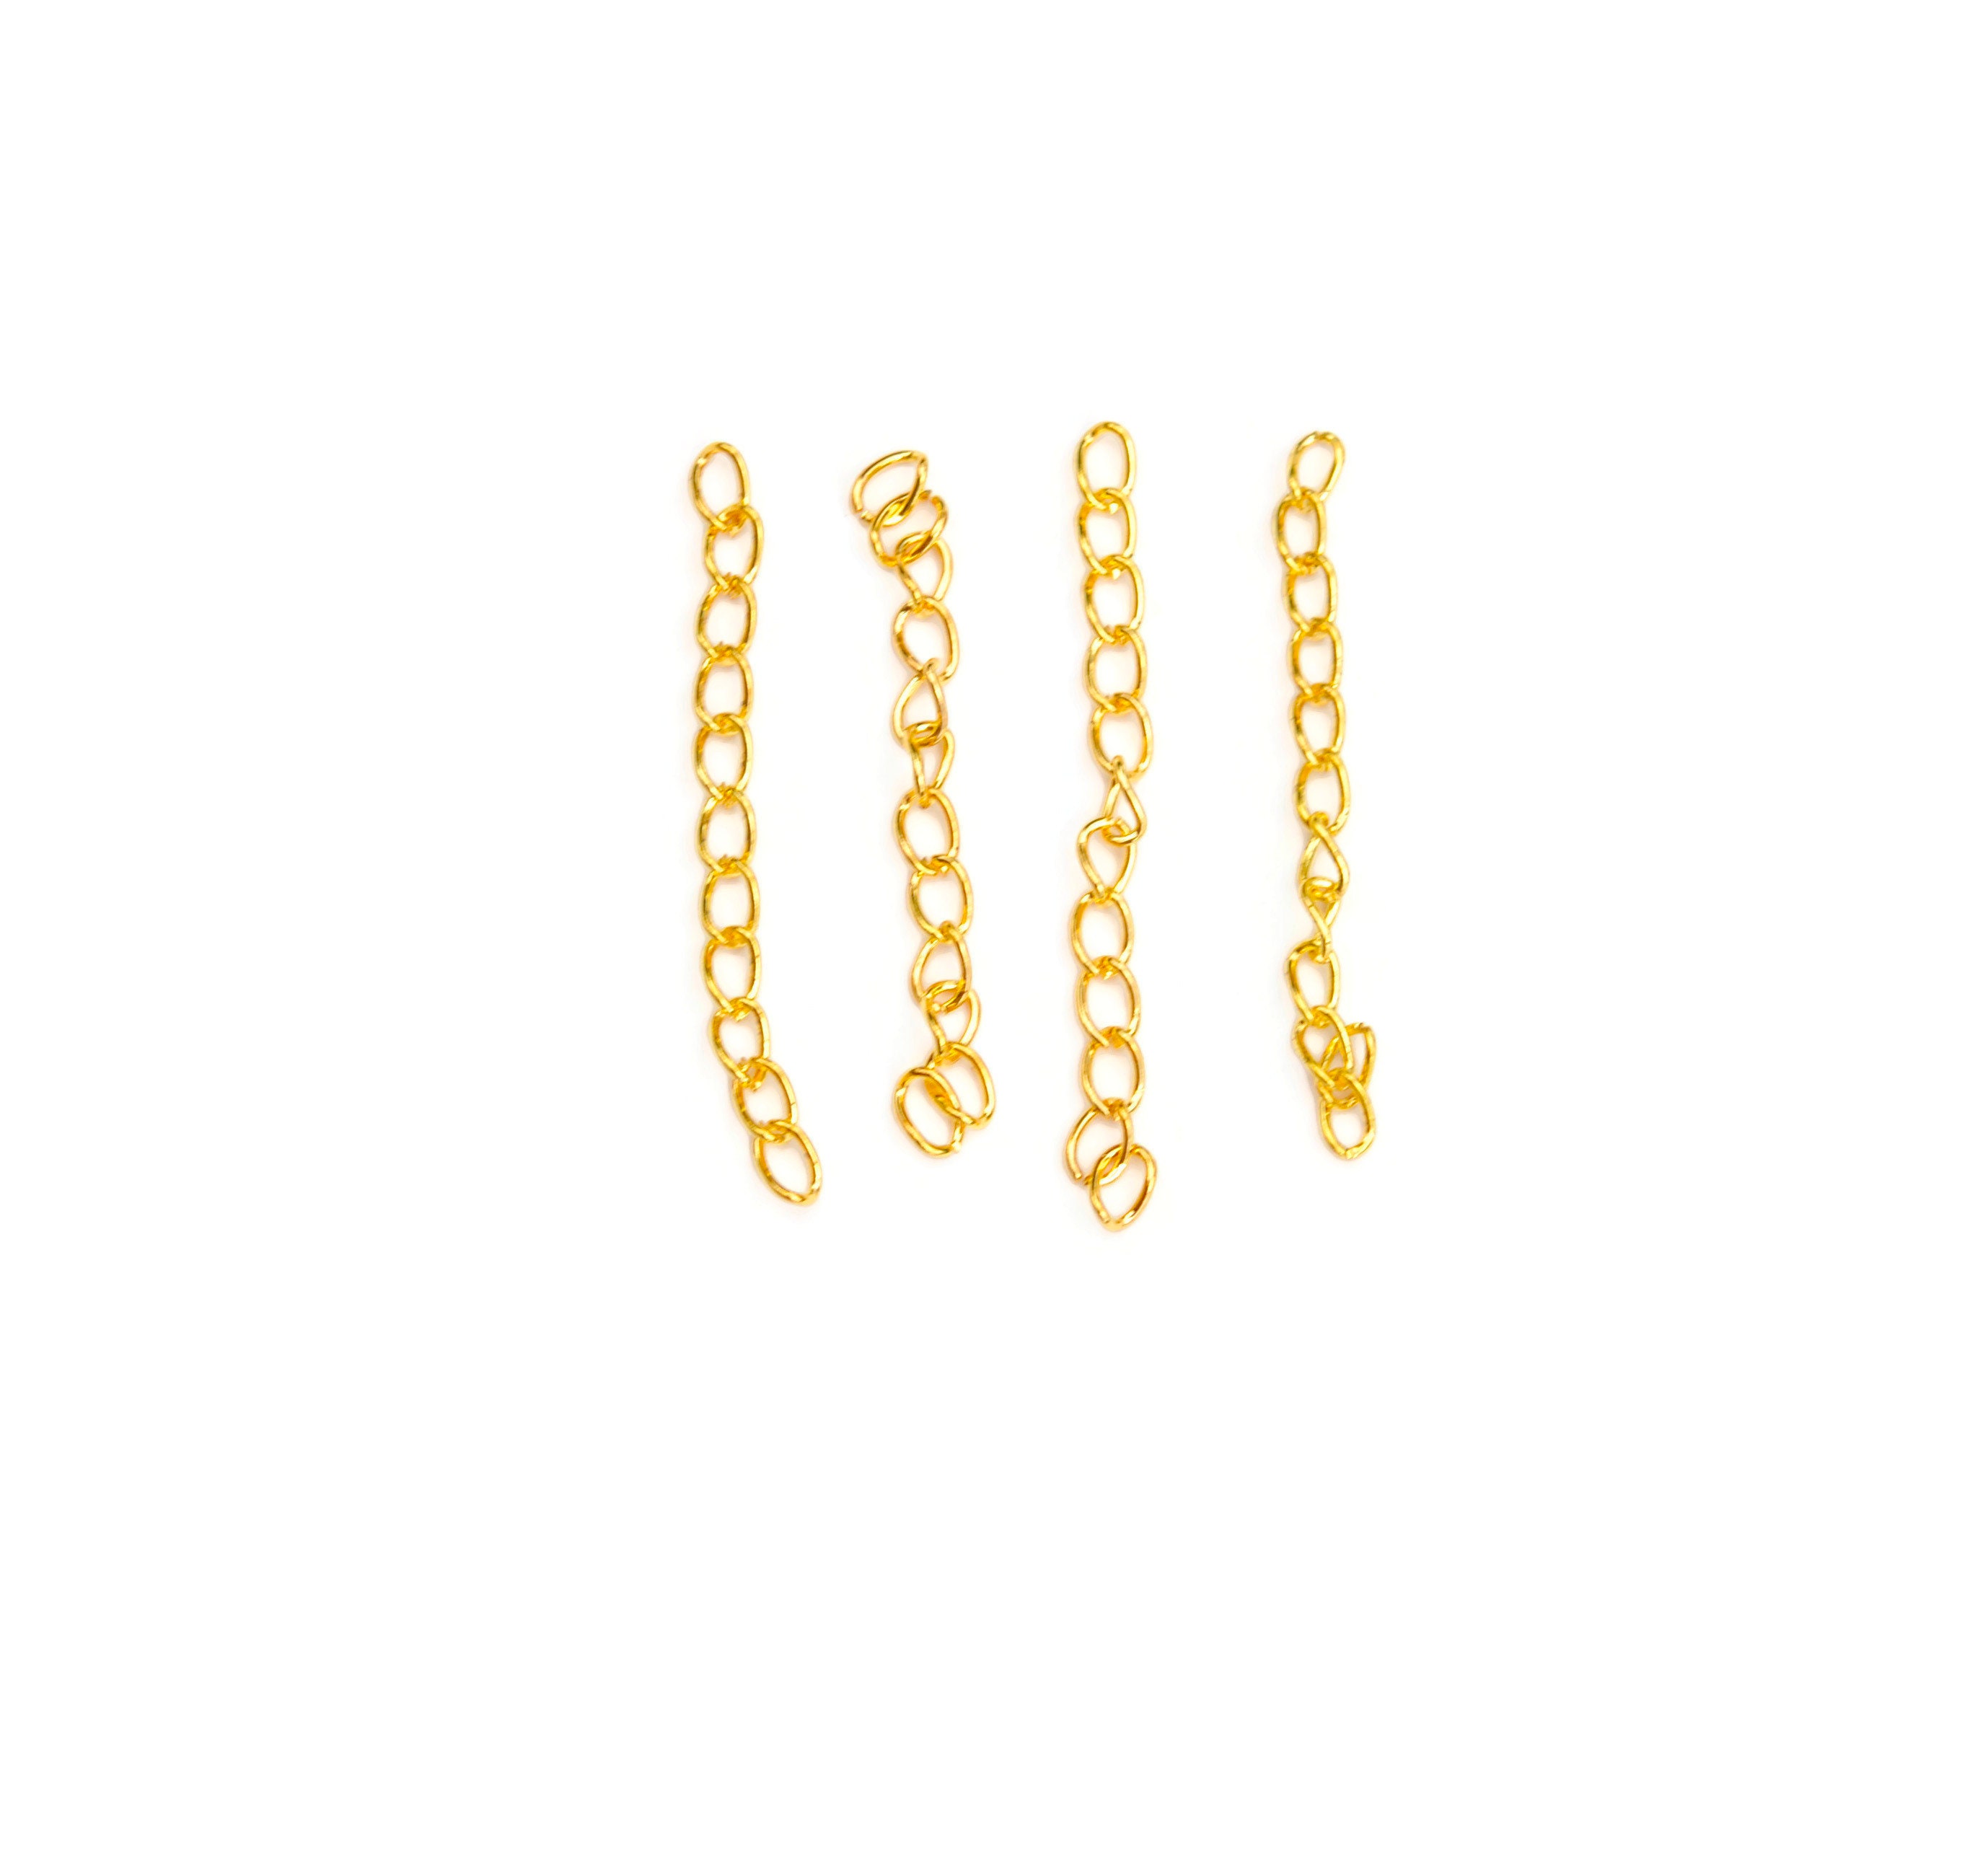 10 Extender Gold Tone Chains F406 